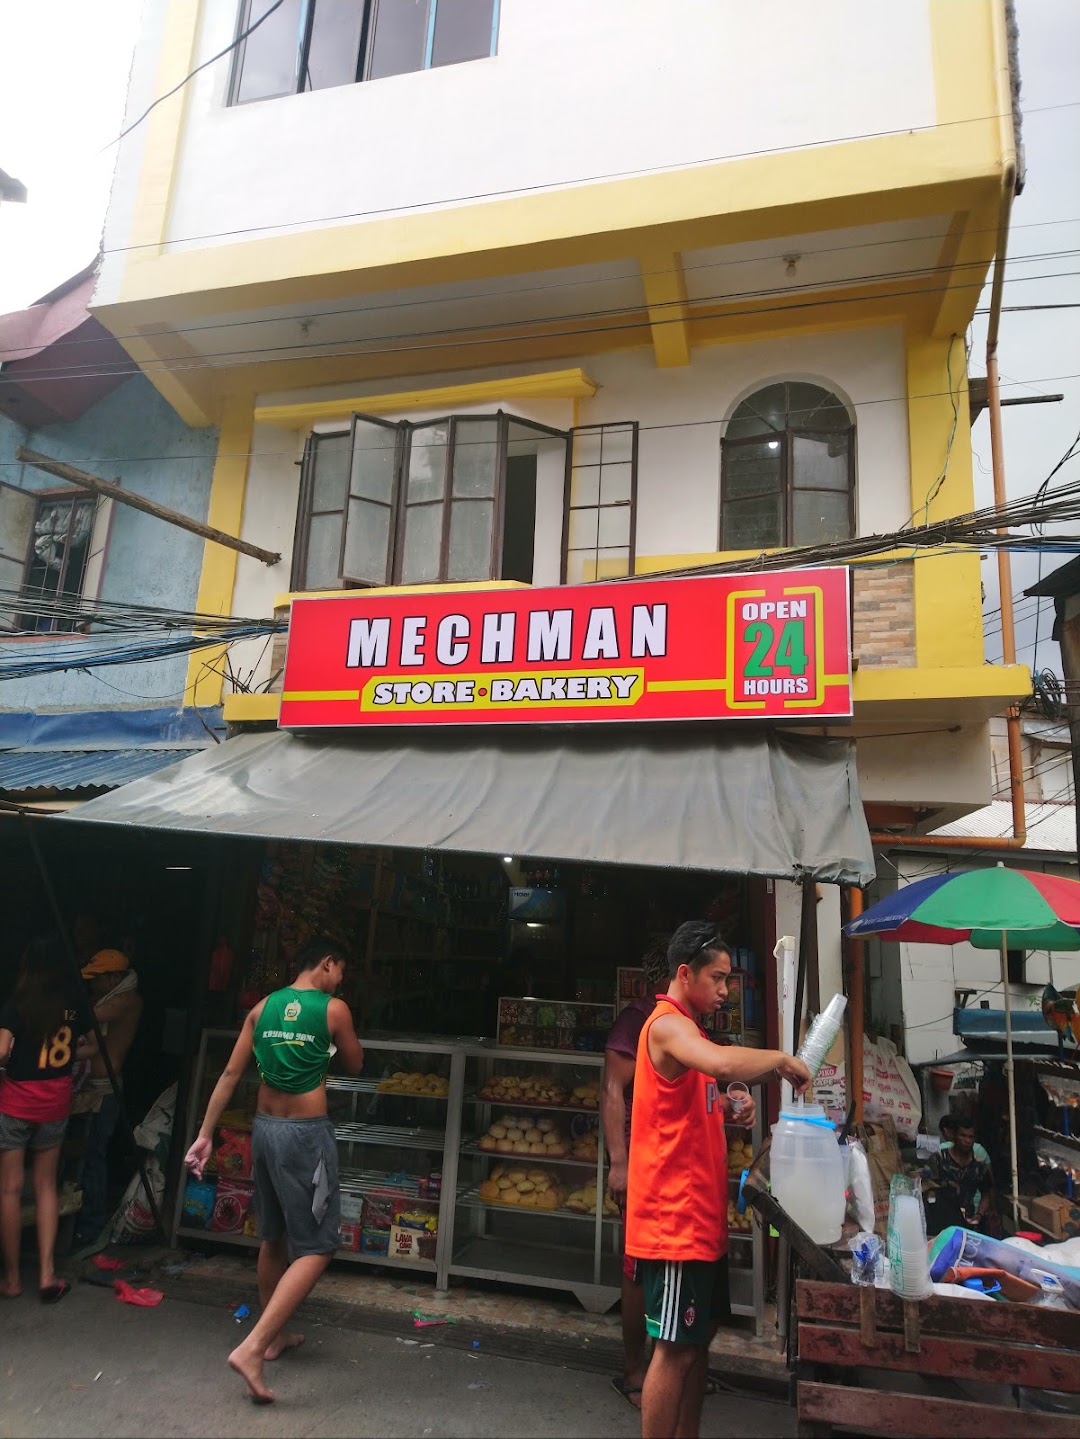 Mechman Store and Bakery